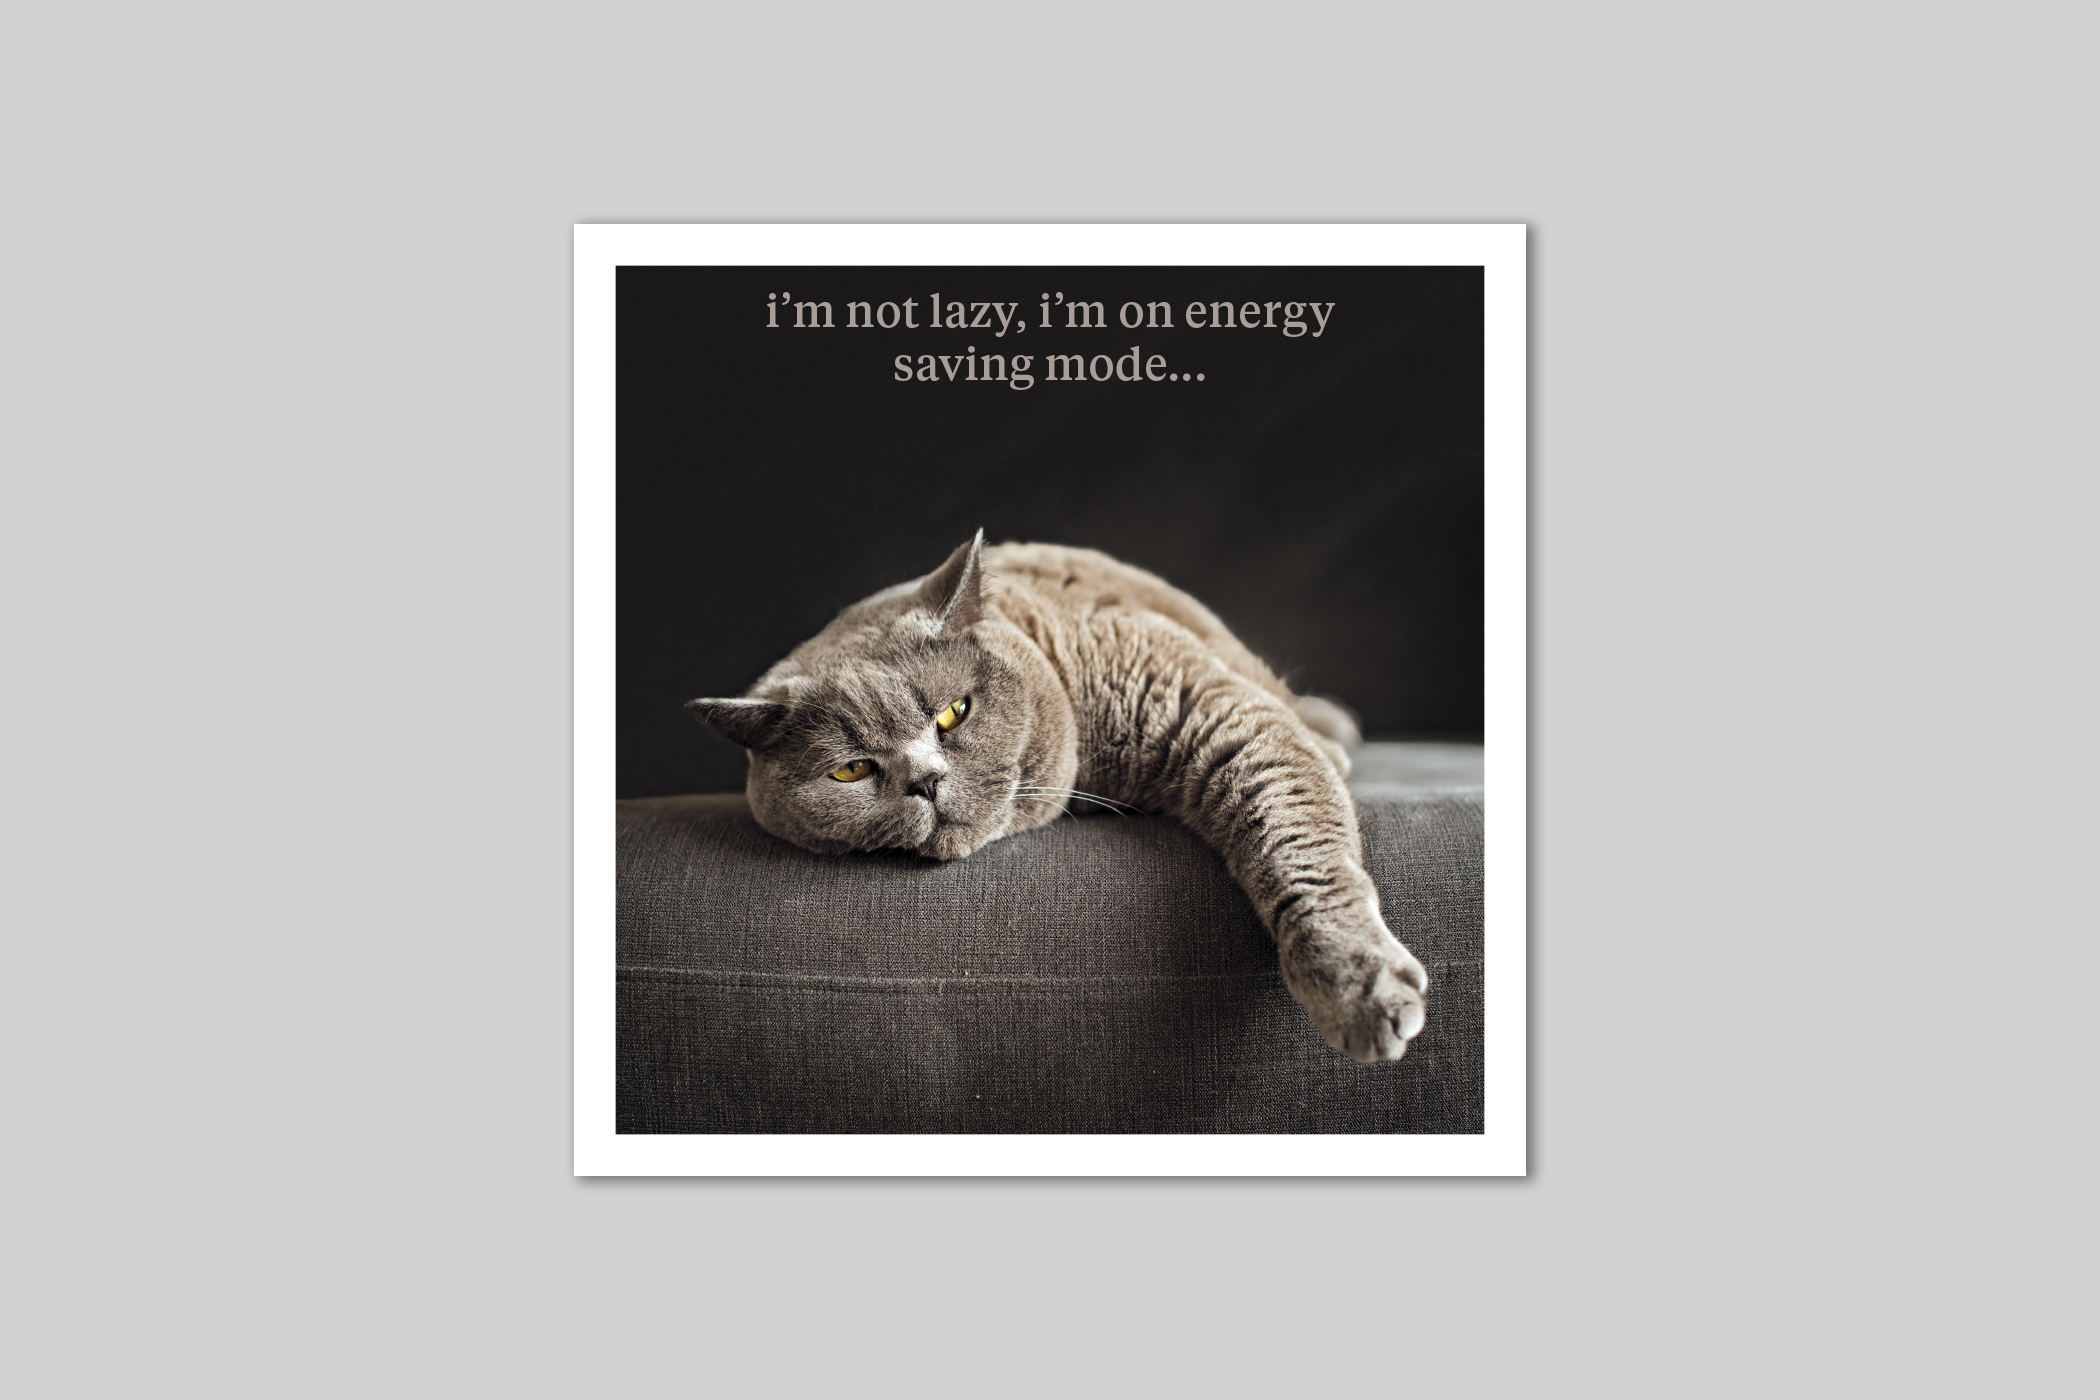 Energy Saving Mode quirky animal portrait from Curious World range of greeting cards by Icon.